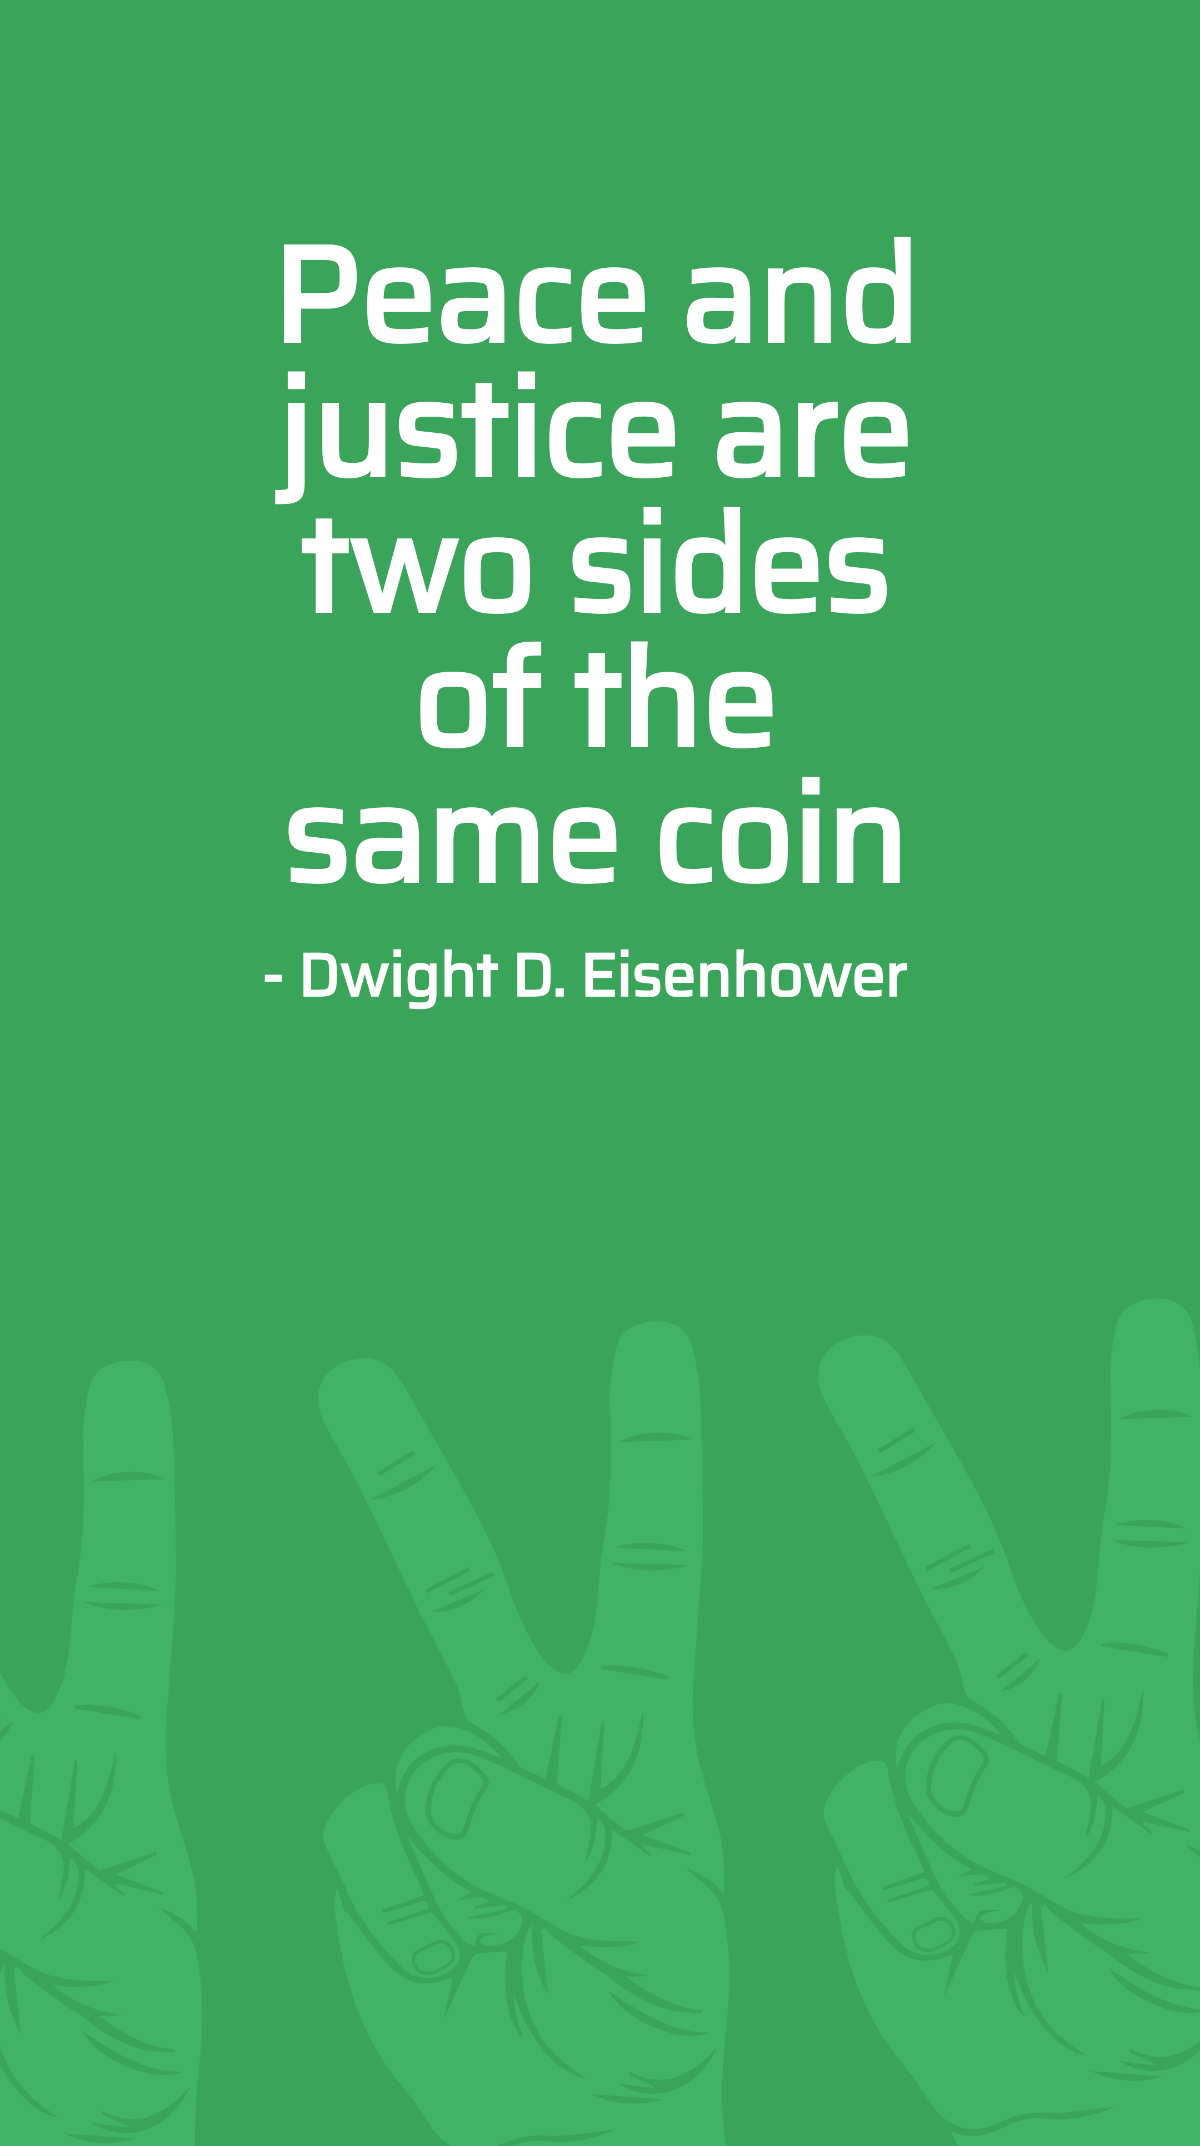 Dwight D. Eisenhower - Peace and justice are two sides of the same coin